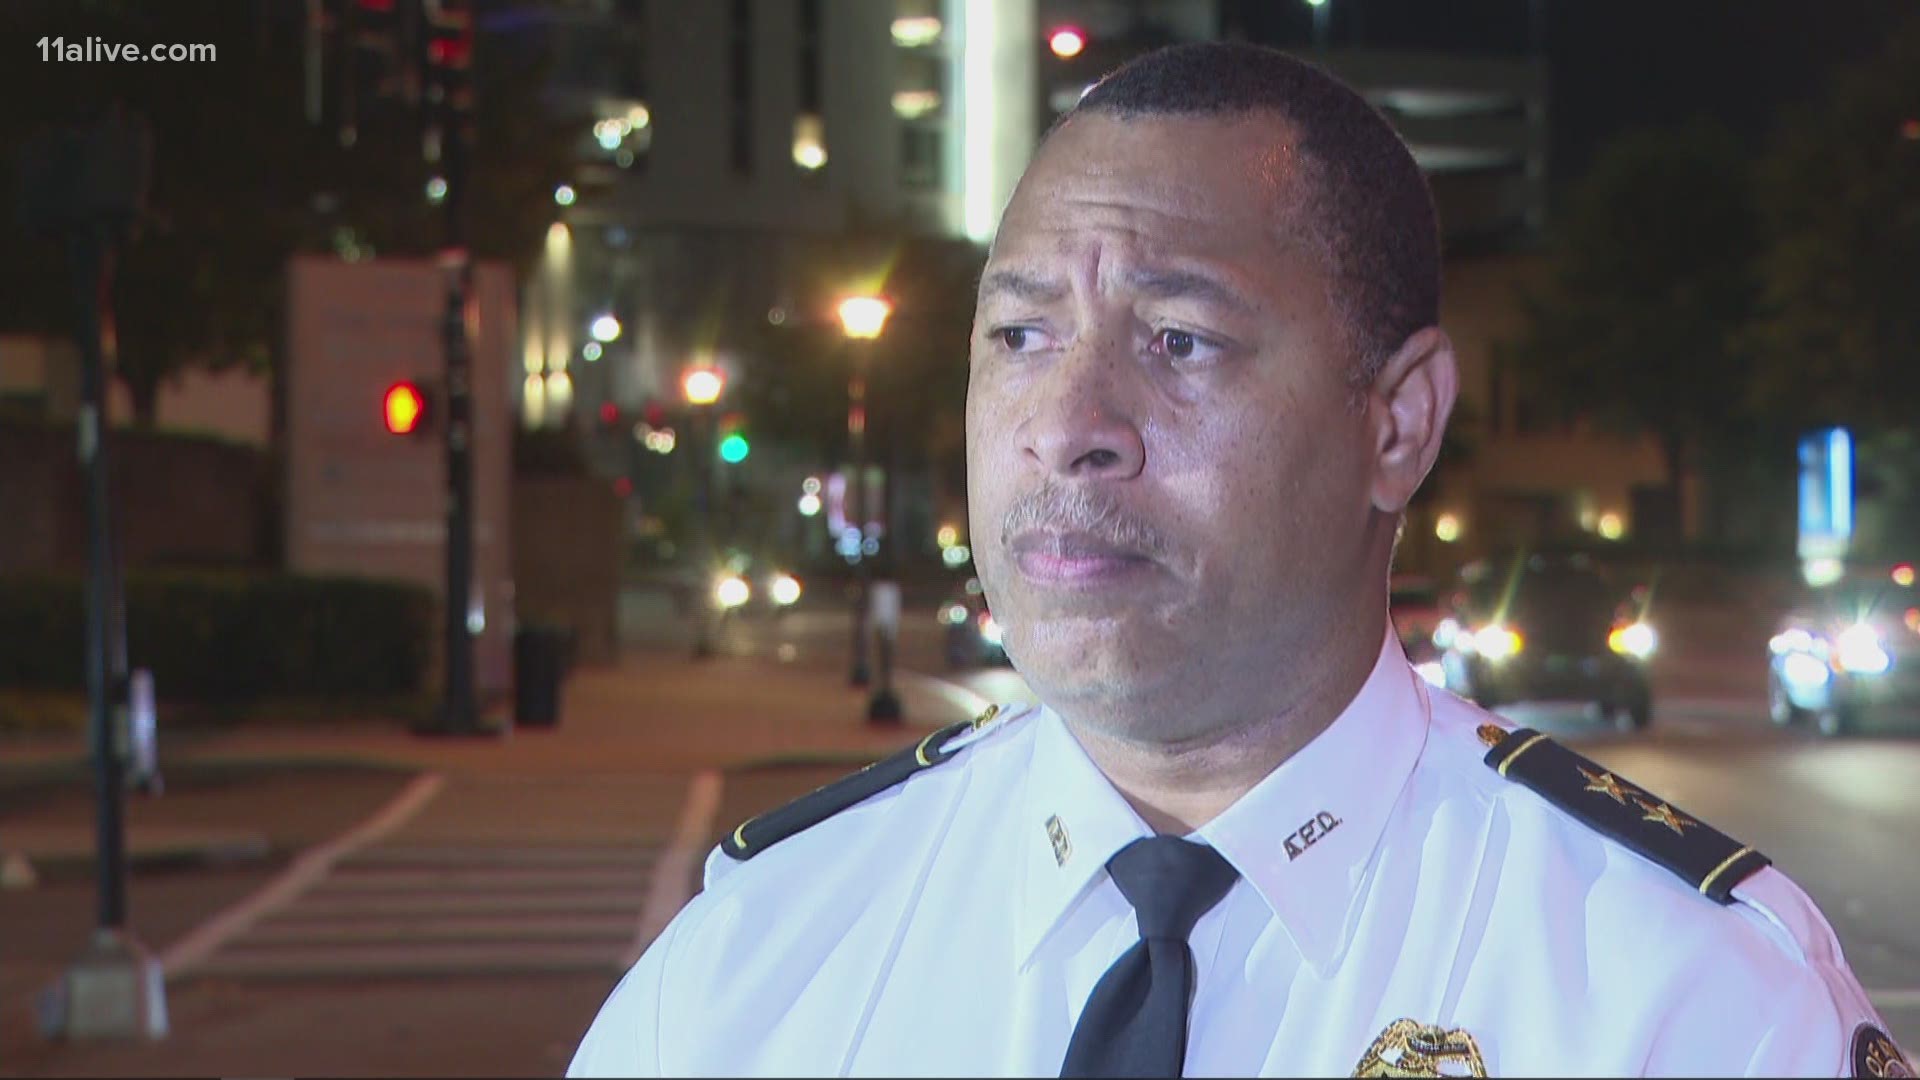 Atlanta mall shooting: A security guard is in critical condition